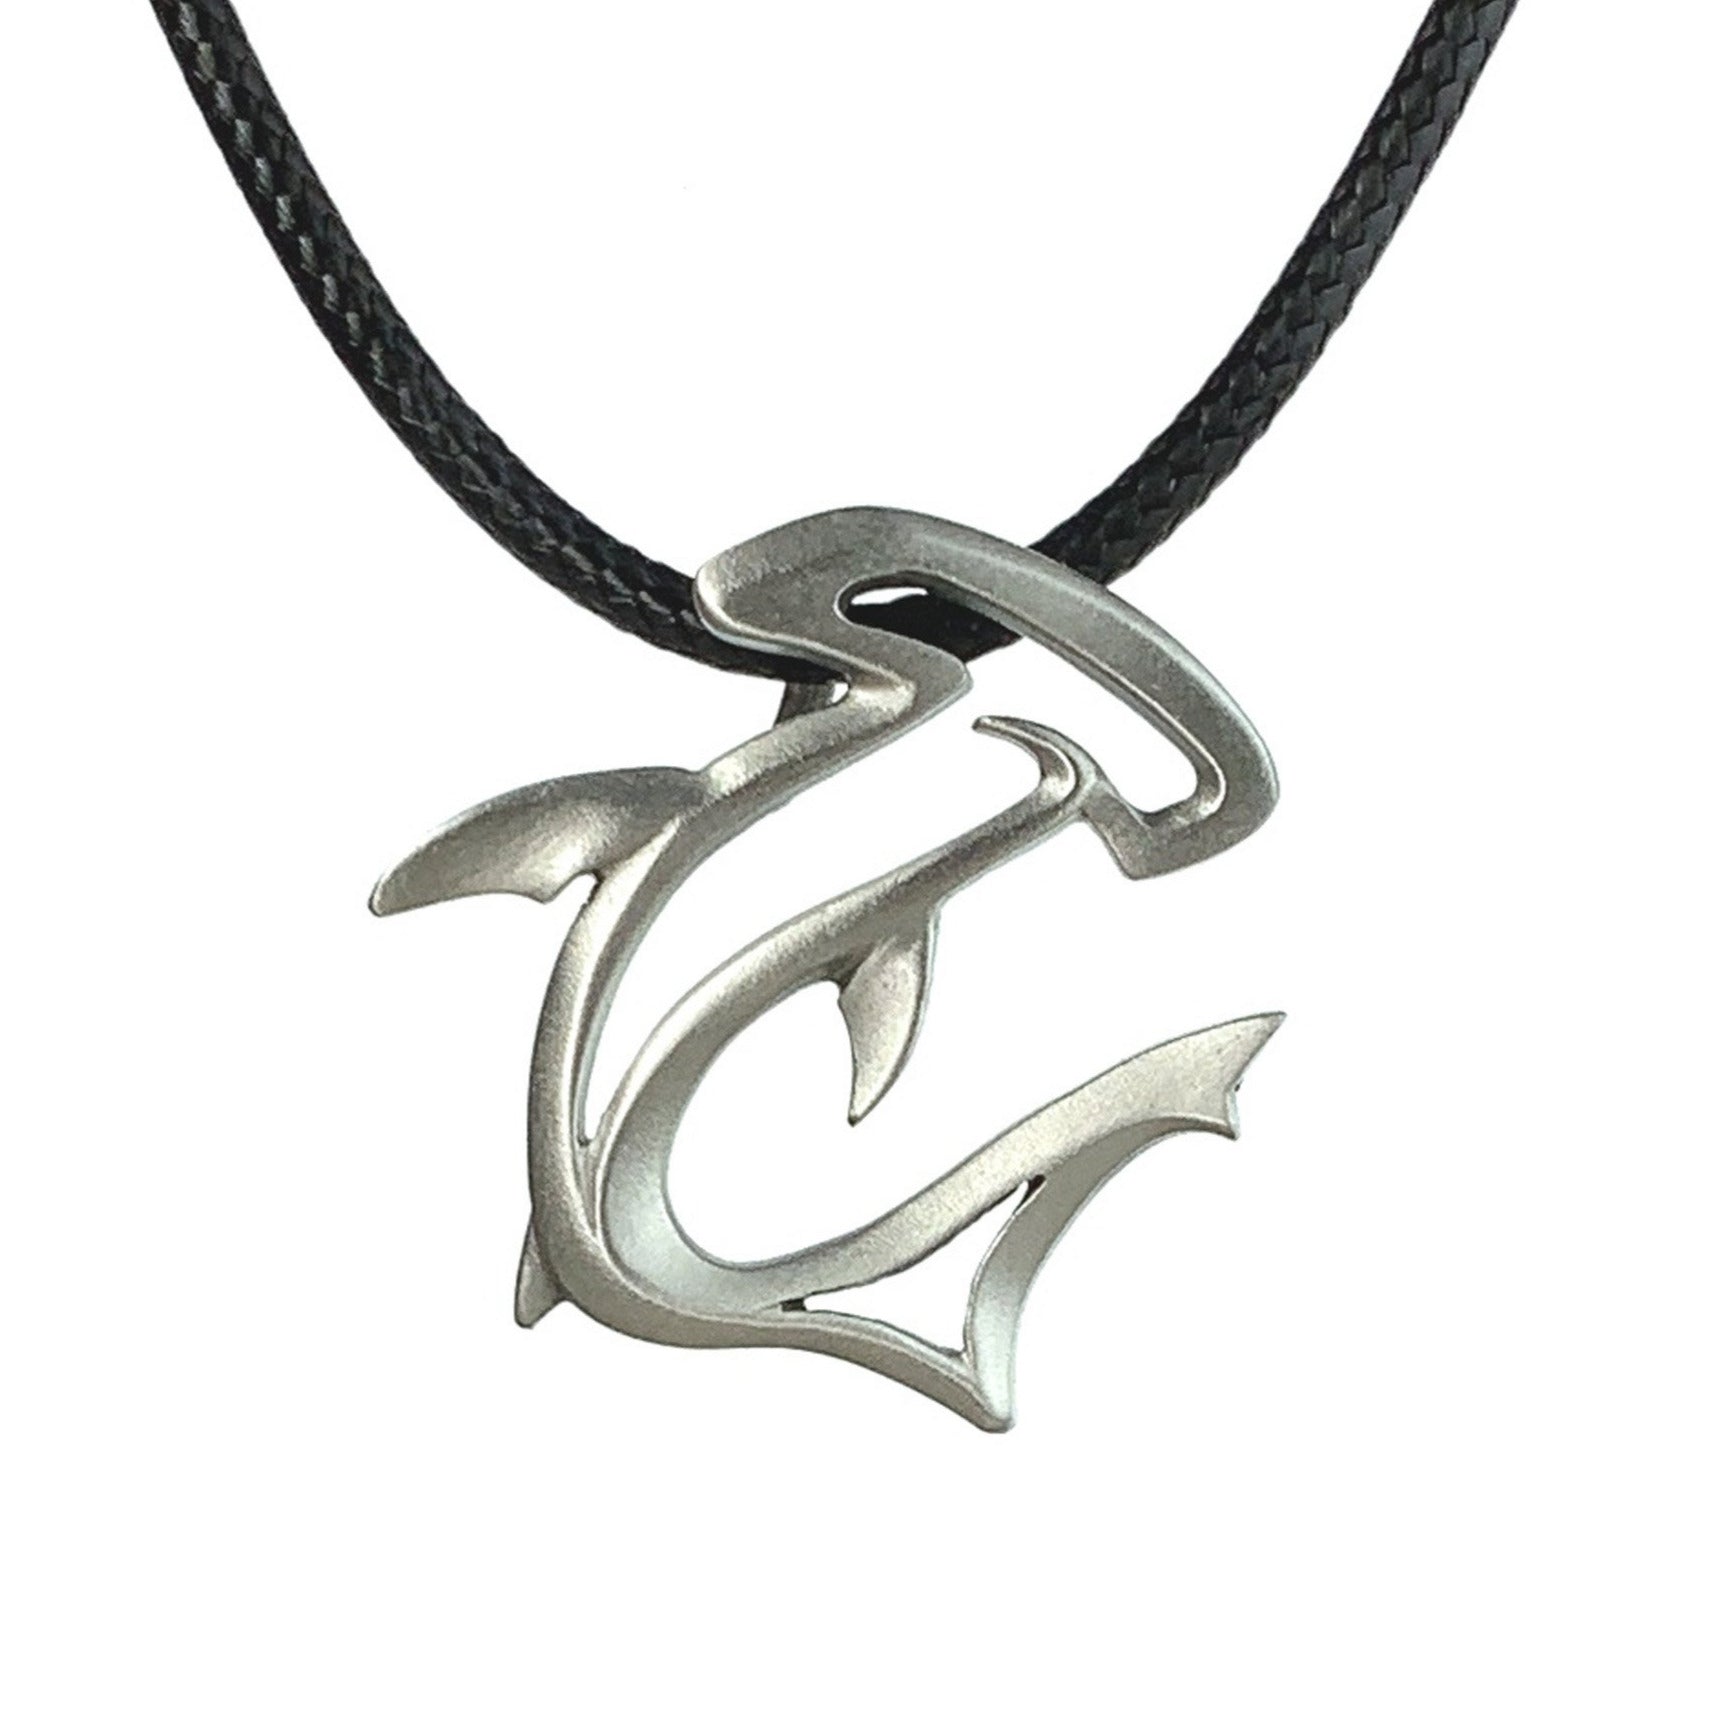 Hammerhead Shark Necklace- Shark Gifts for Women and Men, Hammerhead Shark Necklace, Gifts for Shark Lovers, Sea Life Jewelry, Shark Charm - The Tool Store